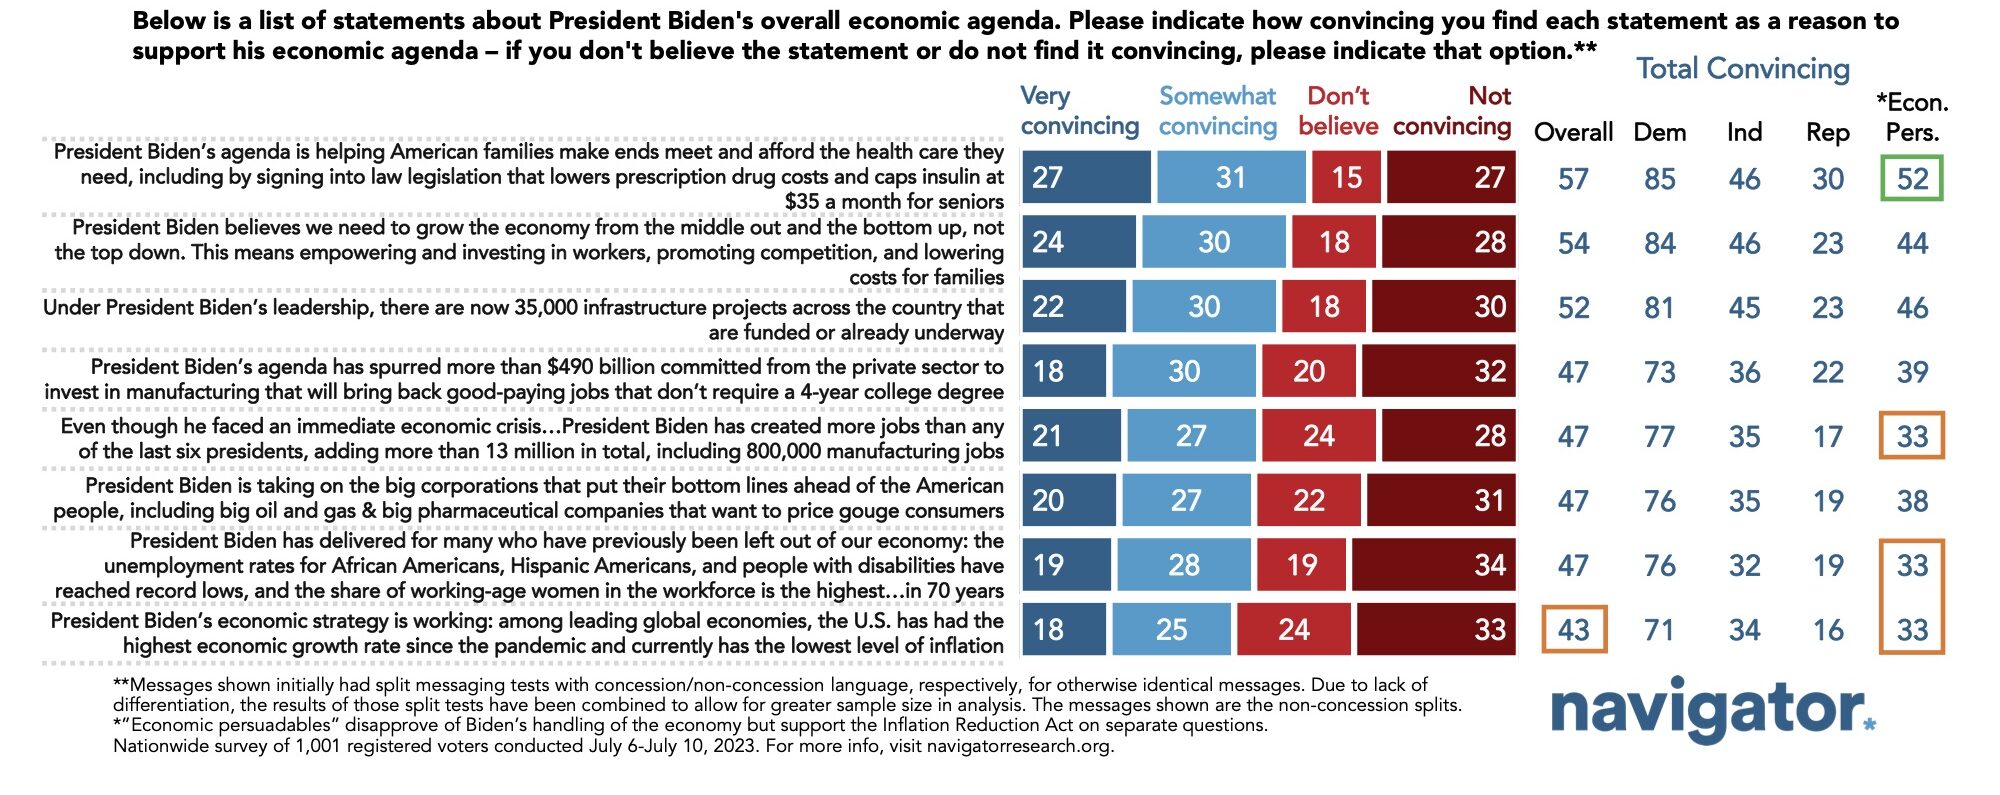 Survey results to the following question/prompt: Below is a list of statements about President Biden's overall economic agenda. Please indicate how convincing you find each statement as a reason to support his economic agenda – if you don't believe the statement or do not find it convincing, please indicate that option.